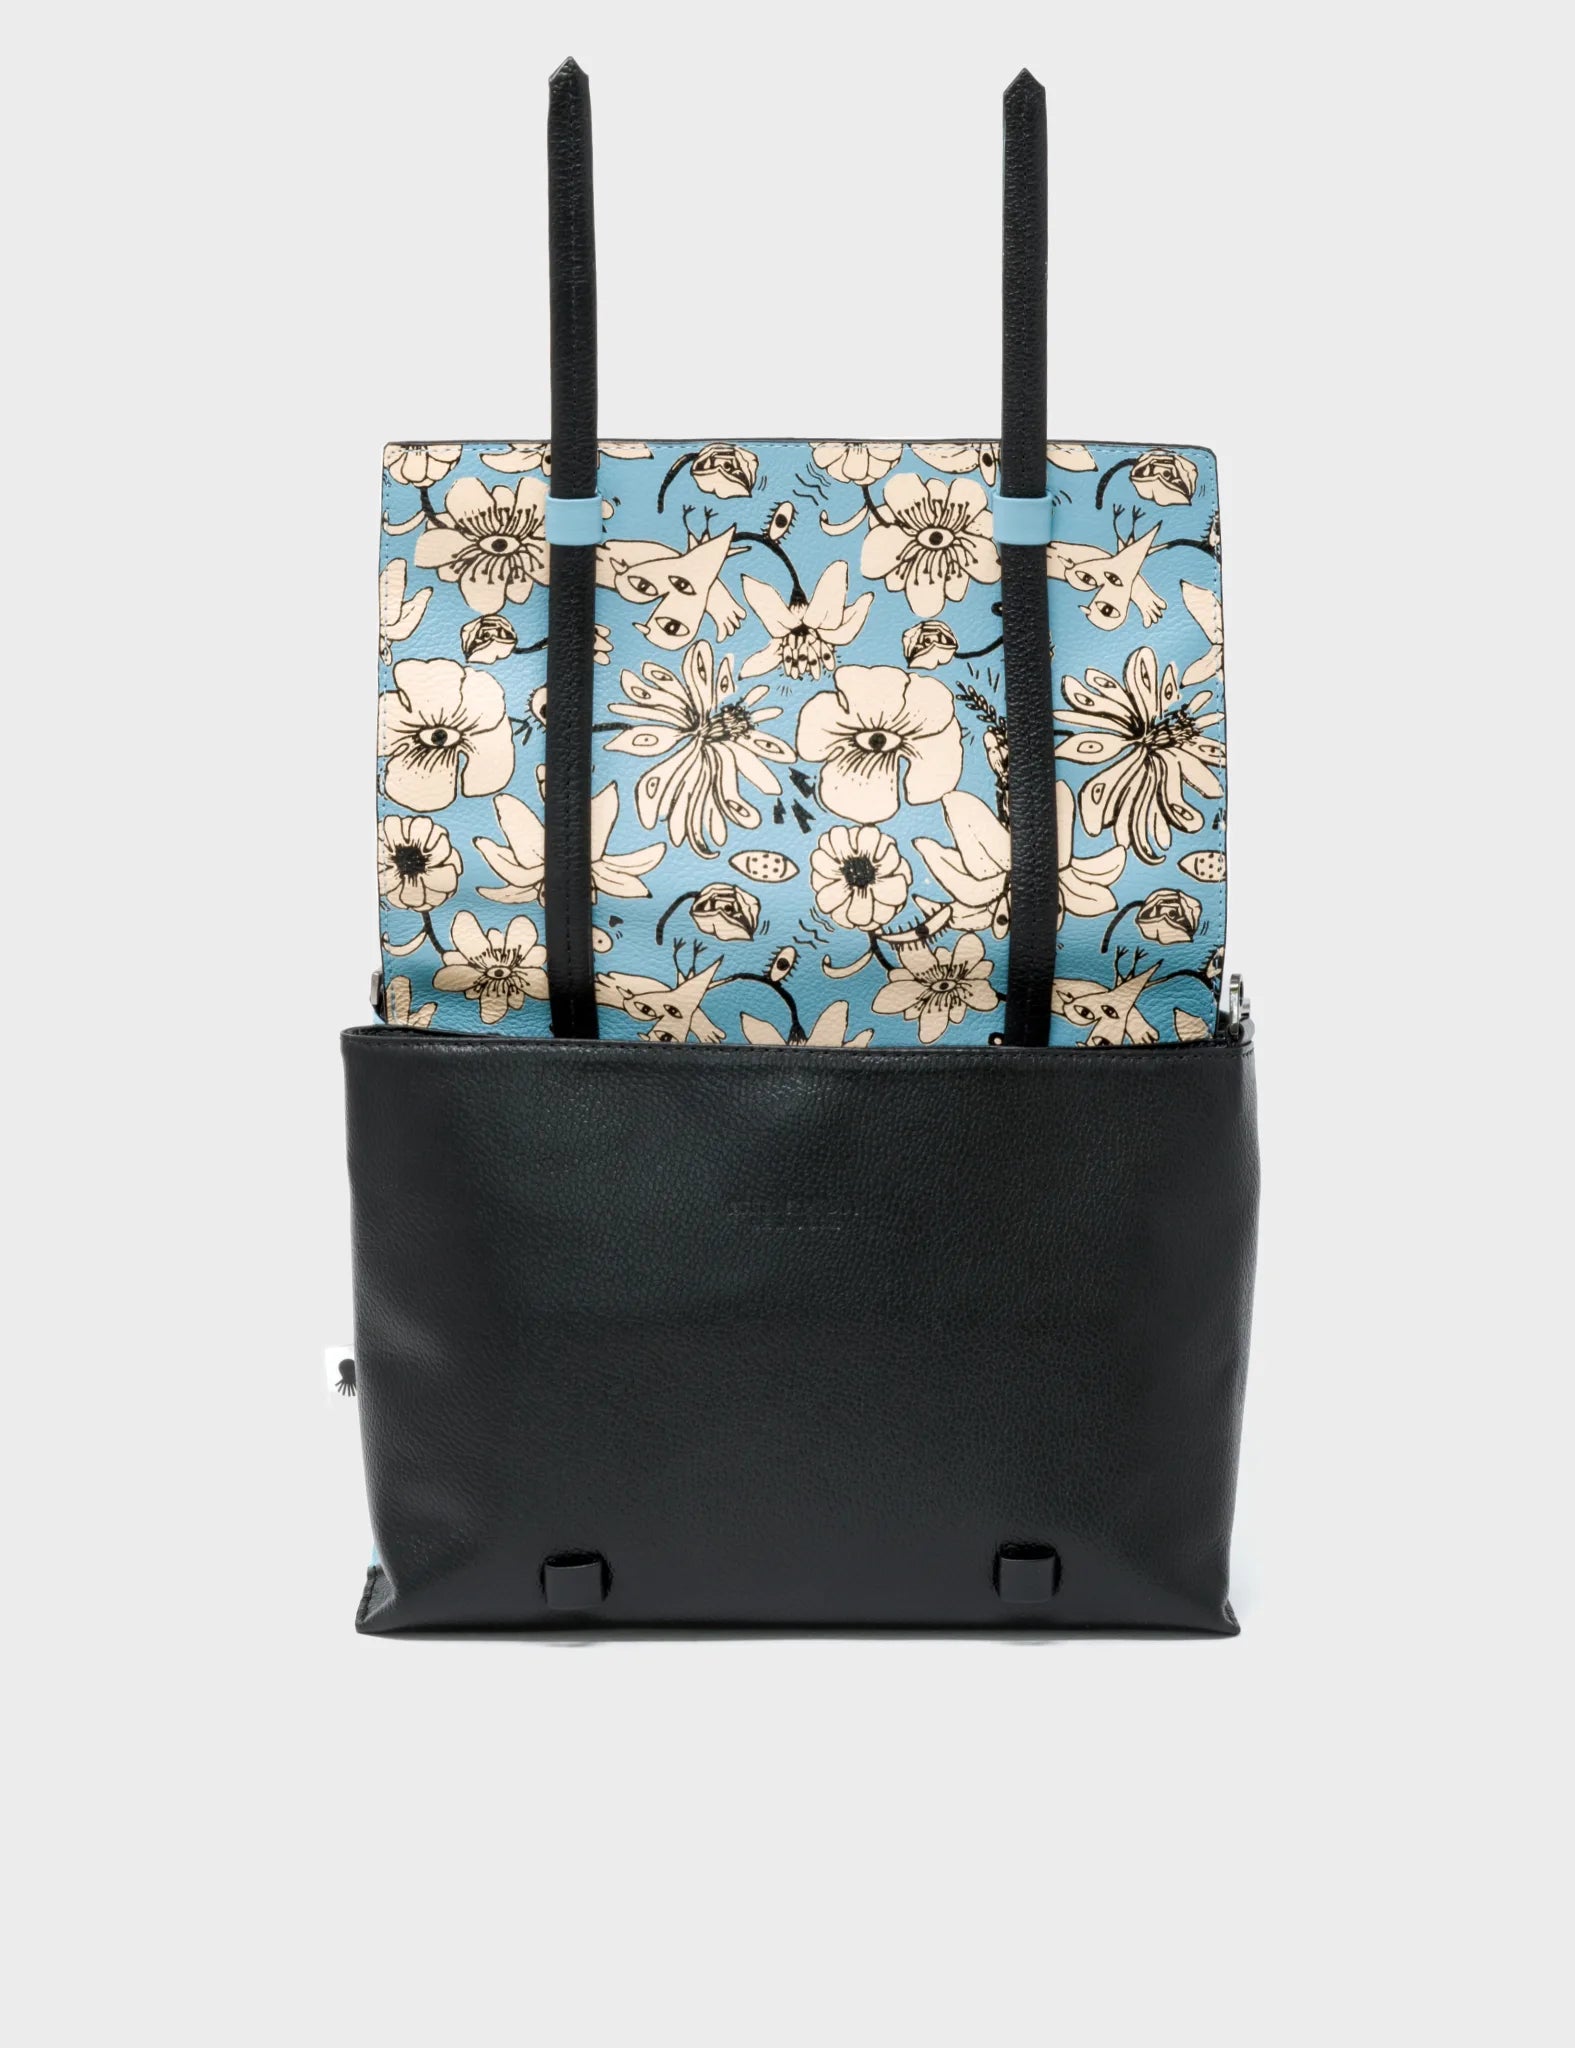 Reversible Small Messenger Bag Balck And Blue Leather - Floral Print - flap